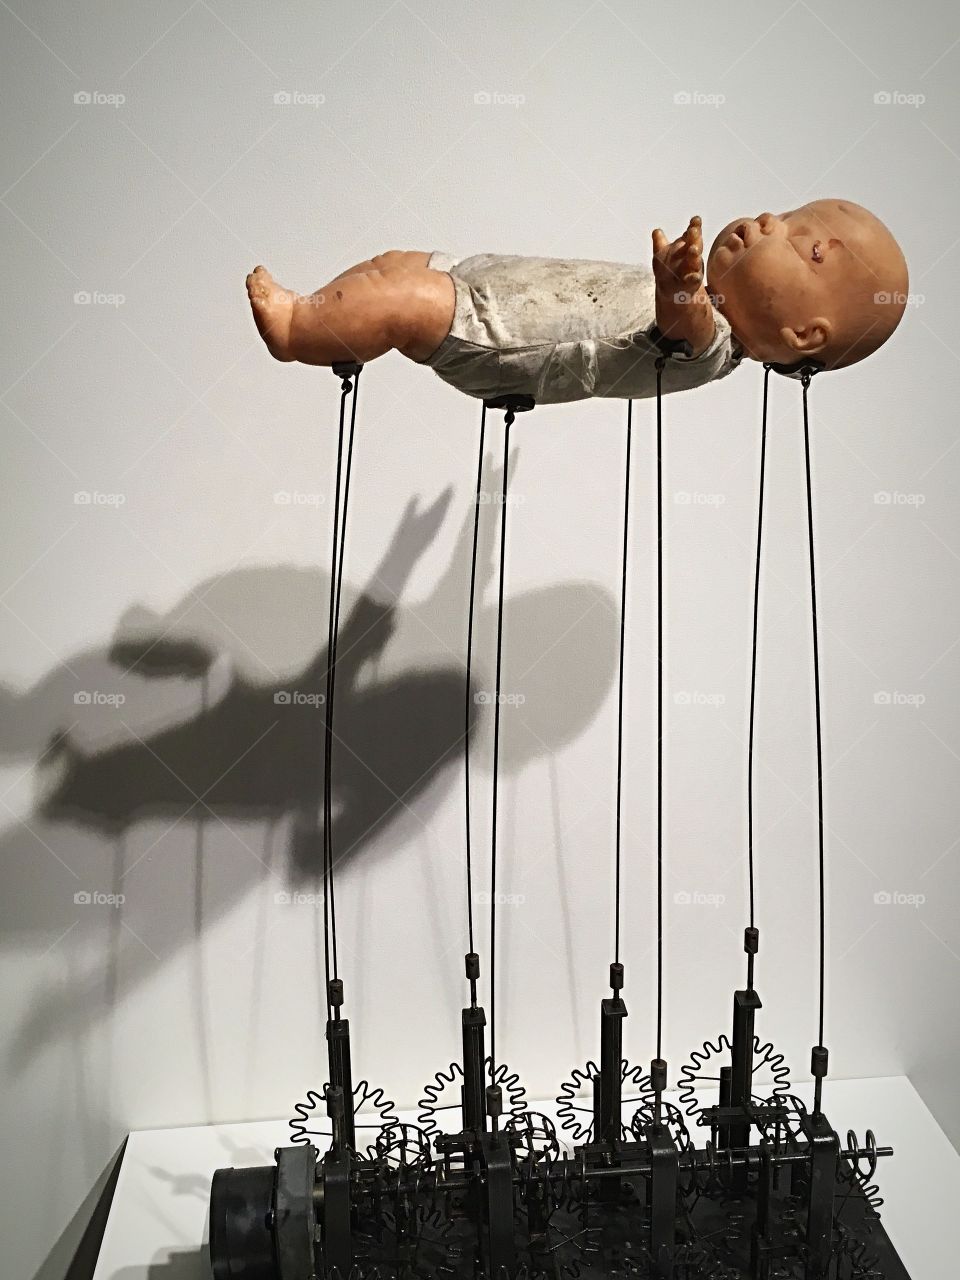 Floating baby - art meets engineering at this museum exhibit at the MIT Museum in Cambridge, MA 